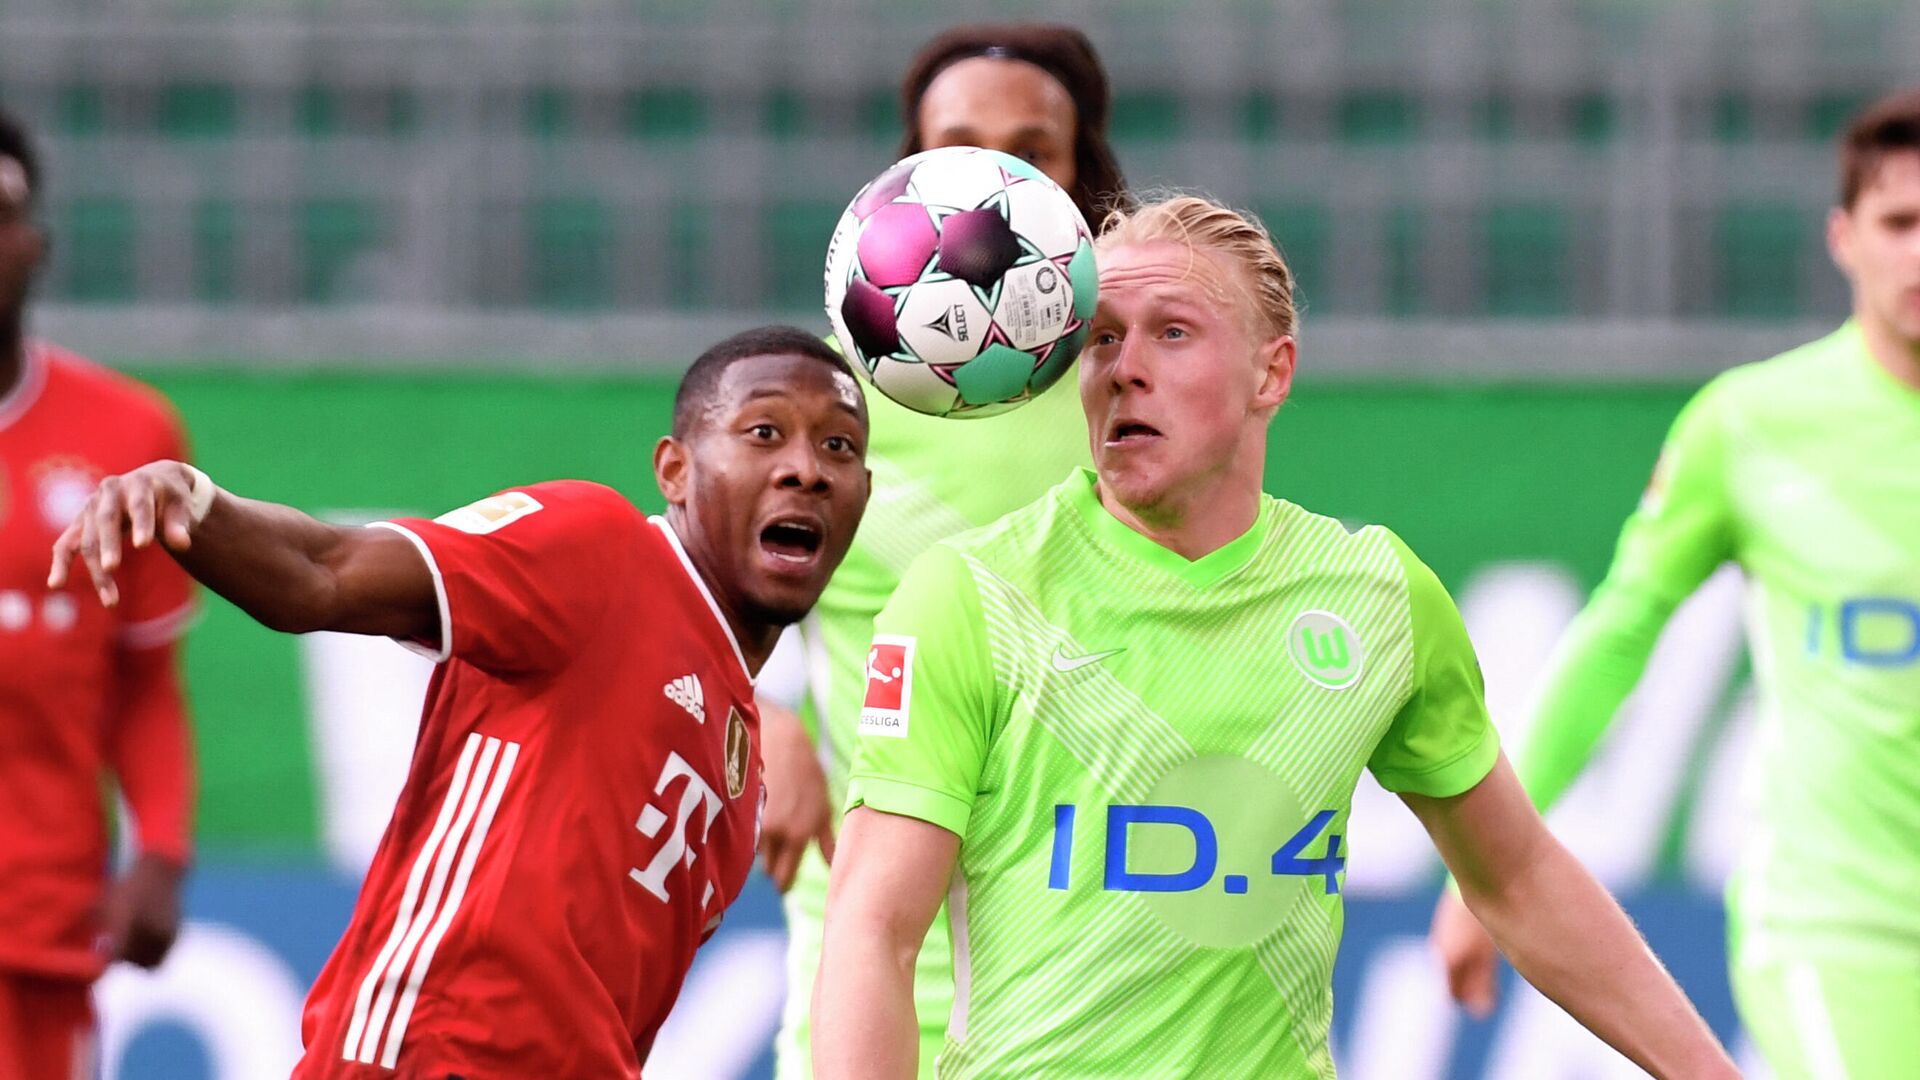 Bayern Munich's Austrian defender David Alaba (L) and Wolfsburg's Austrian midfielder Xaver Schlager vie for the ball during the German first division Bundesliga football match between VfL Wolfsburg and FC Bayern Munich in Wolfsburg, northern Germany, on April 17, 2021. (Photo by FABIAN BIMMER / POOL / AFP) / DFL REGULATIONS PROHIBIT ANY USE OF PHOTOGRAPHS AS IMAGE SEQUENCES AND/OR QUASI-VIDEO - РИА Новости, 1920, 17.04.2021